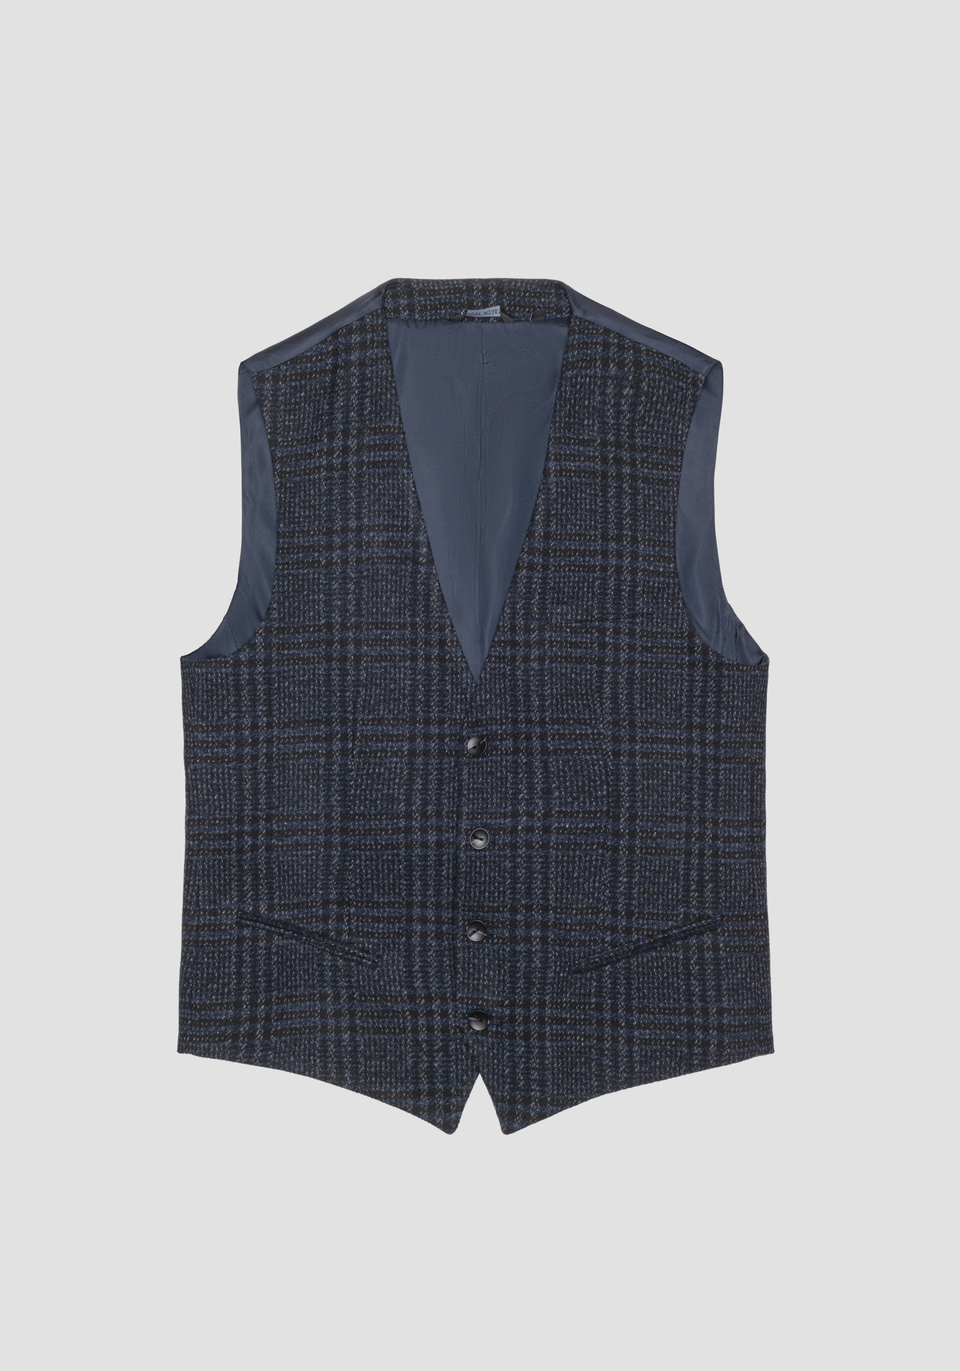 SLIM FIT WAISTCOAT IN SOFT WOOL BLEND FABRIC WITH PRINCE OF WALES PATTERN - Antony Morato Online Shop